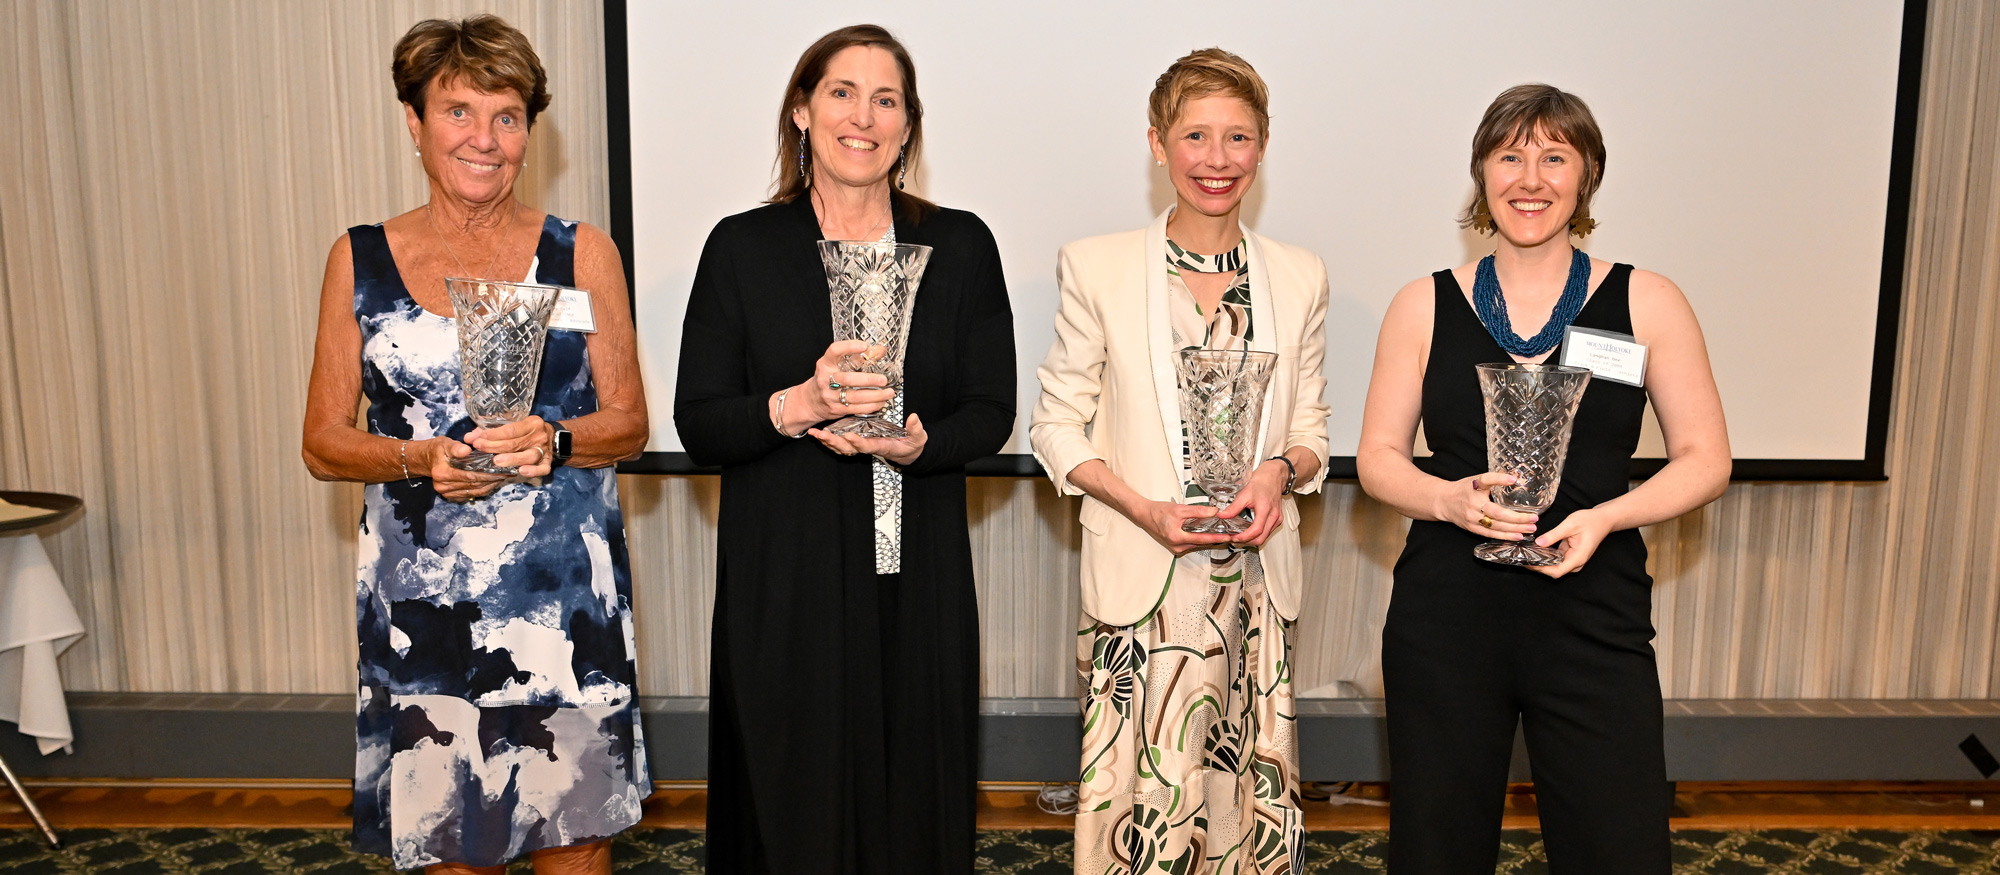 From left to right) Penny Calf '68, Mary Mazzio '83, Catherine Herrold '00, and Langhan Dee '04 were inducted along Elizabeth Kennan '60 (in absentia) into the Mount Holyoke College Athletics Hall of Fame on May 25, 2023. (Bob Blanchard/RJB Sports)